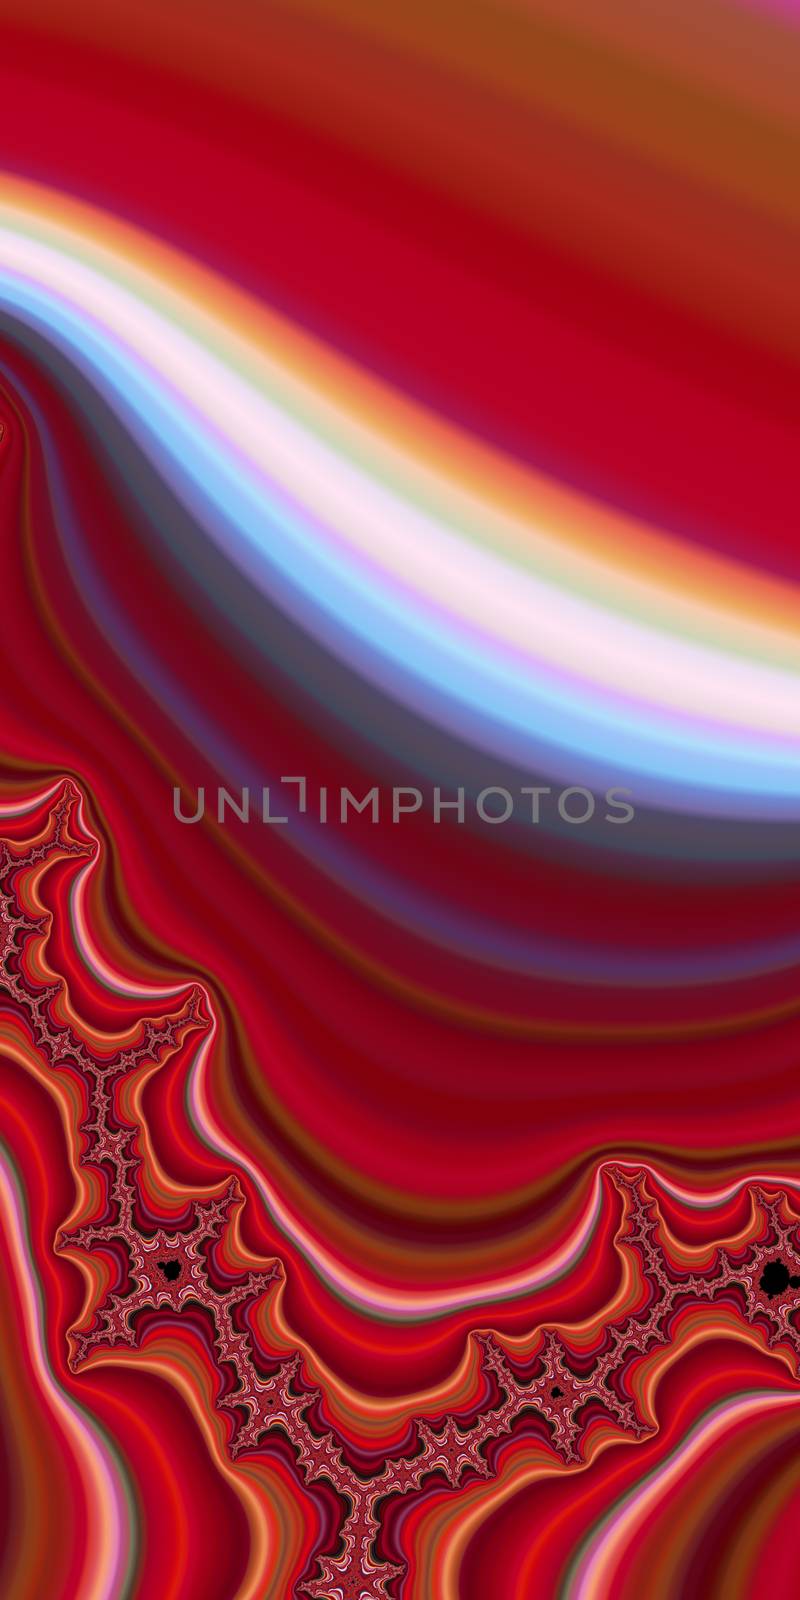 An abstract fractal design representing a rainbow with a cascade of mostly red colors.